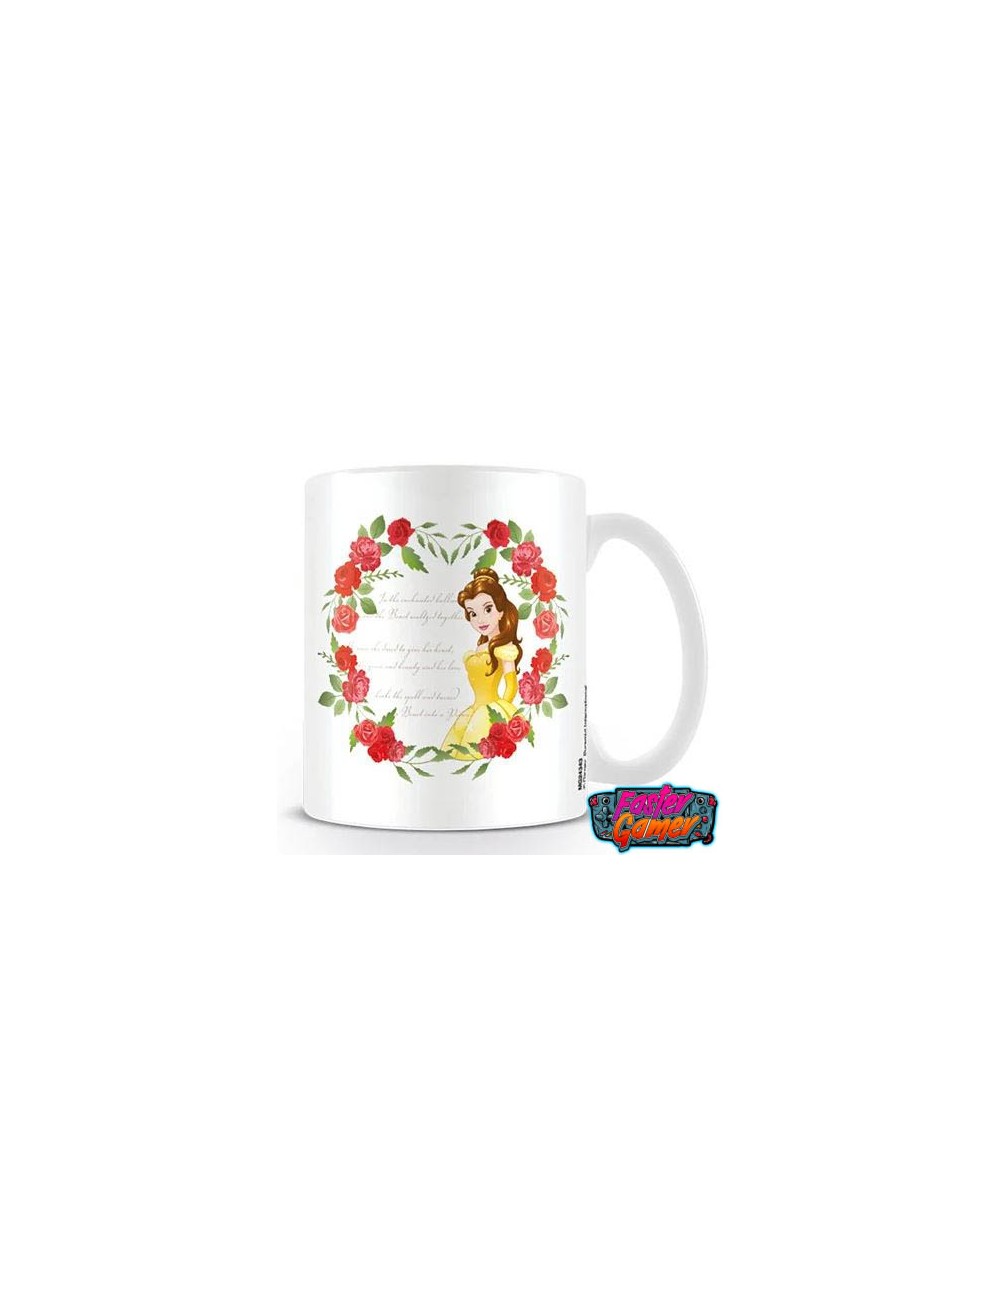 DISNEY - Mug - 300 ml - Beauty and the Beast - Chip One Lump or Two